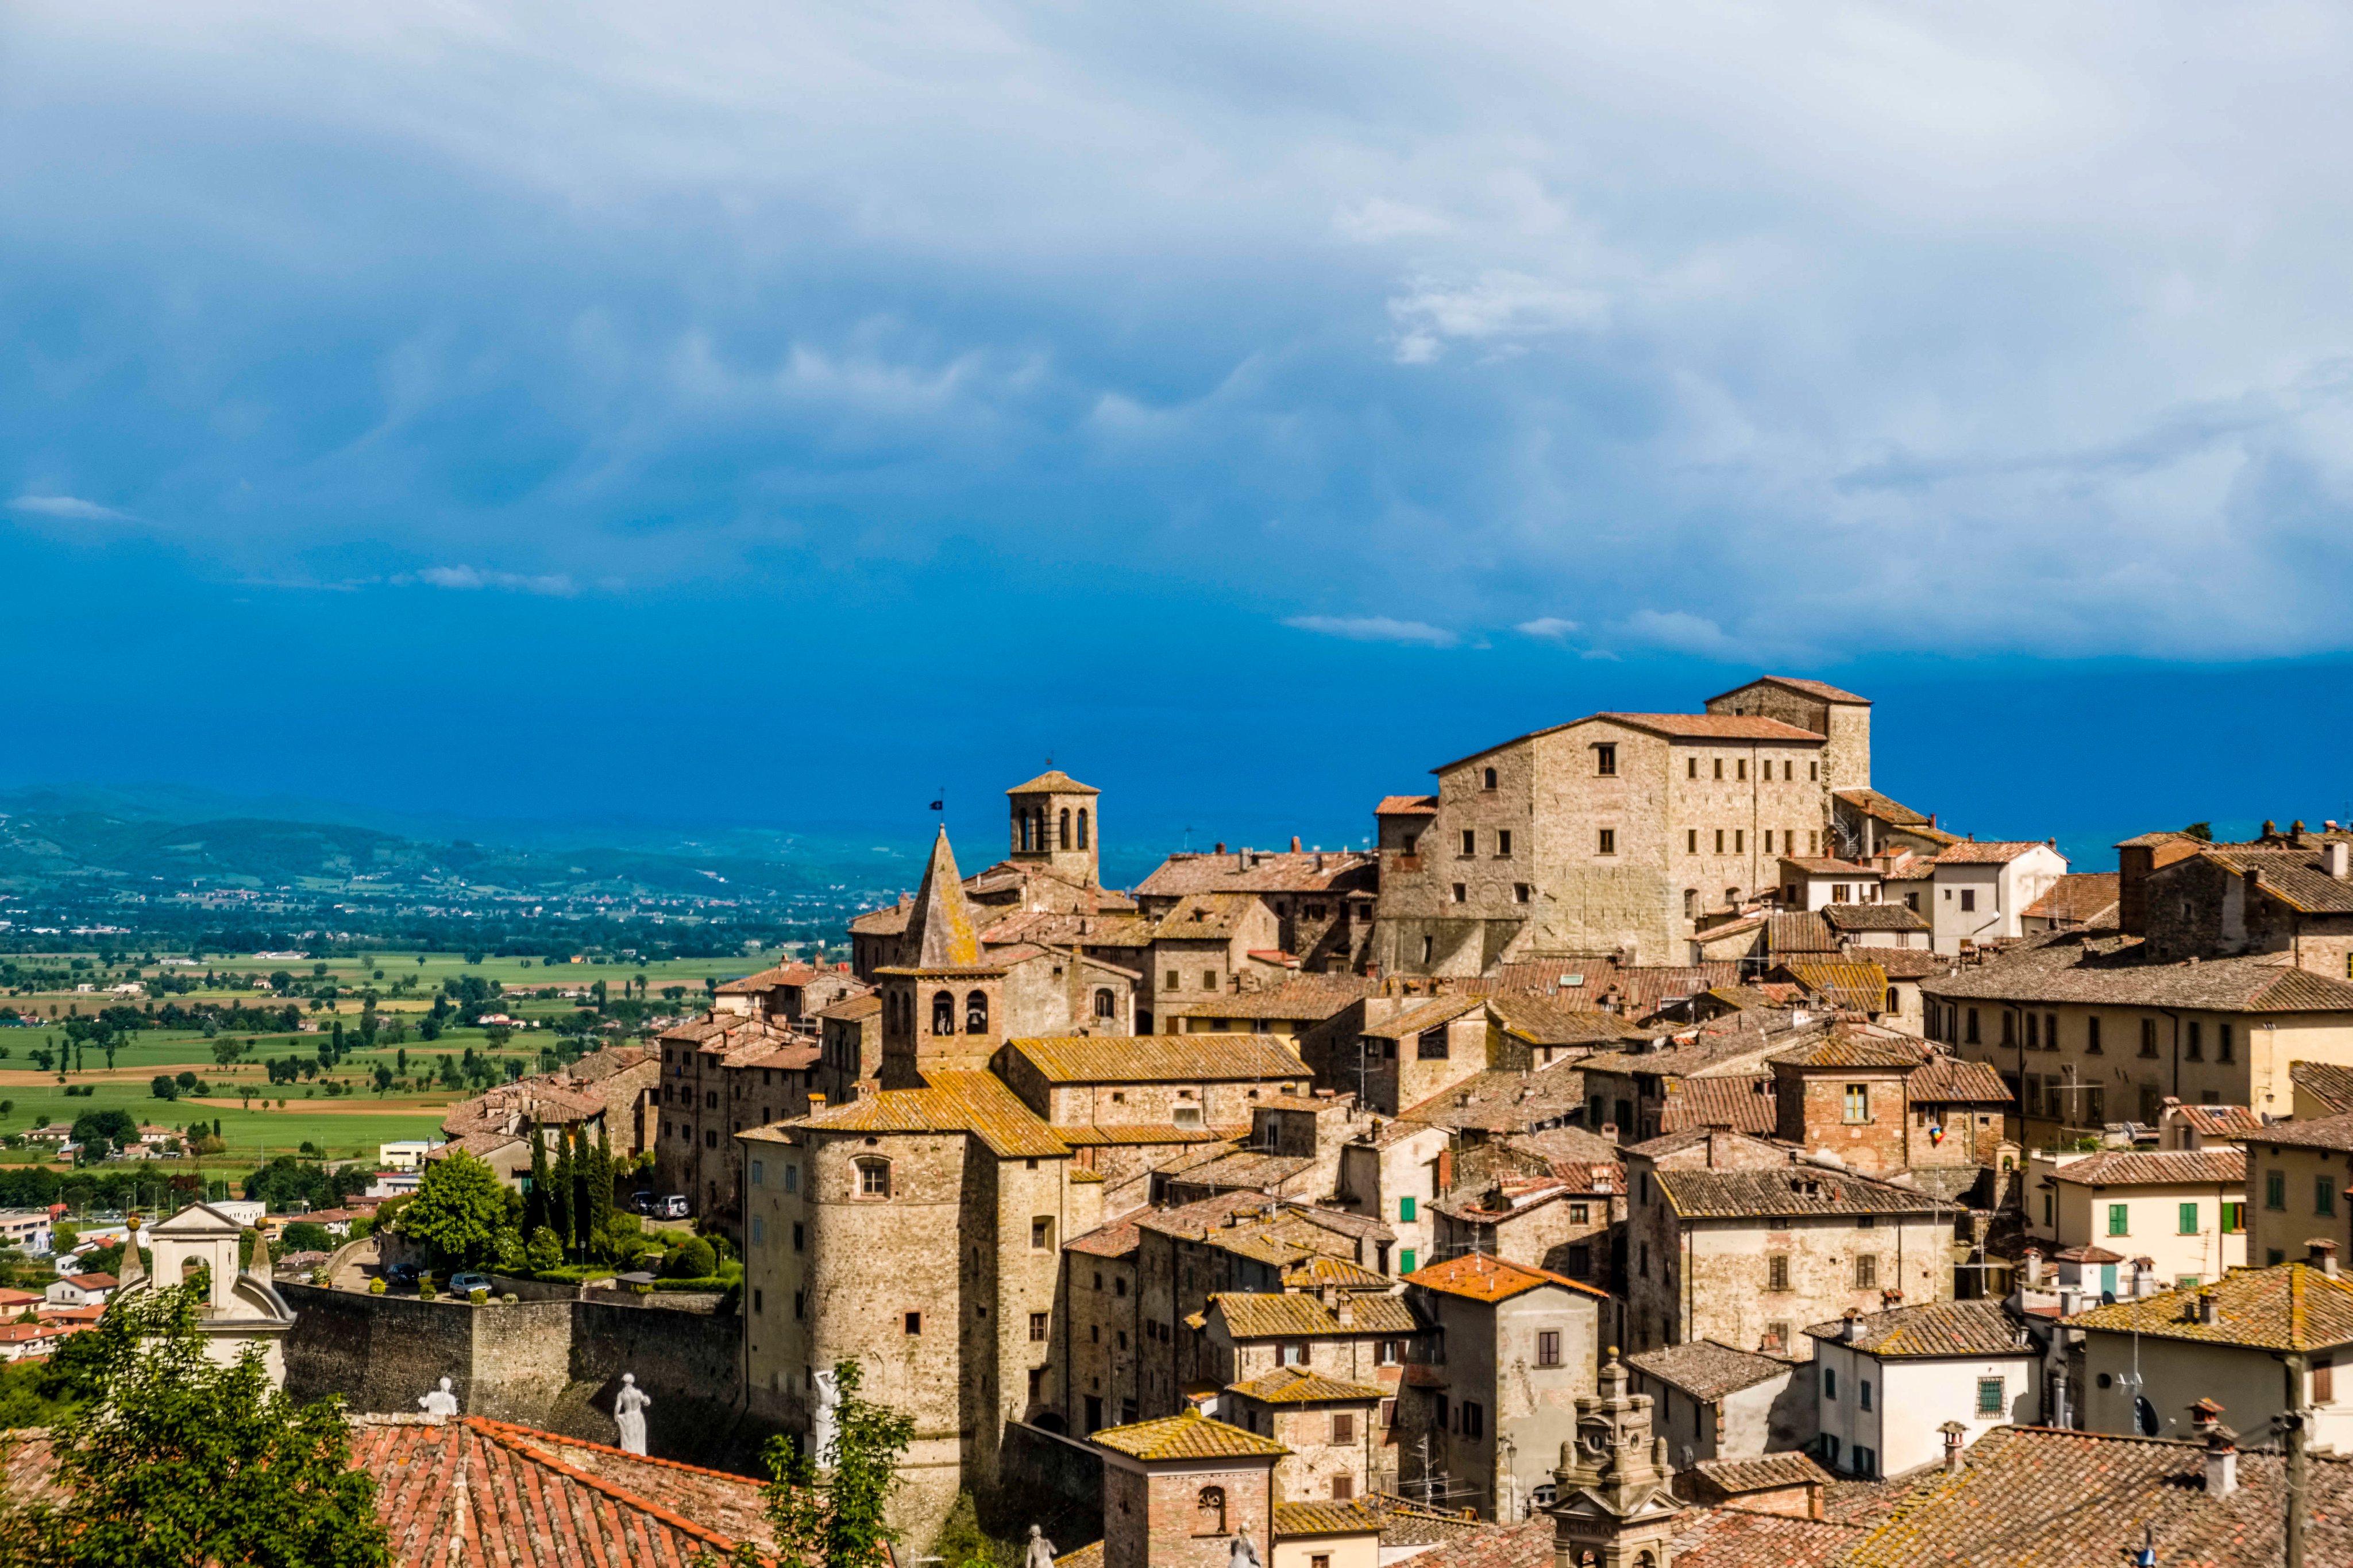 Typical hilly Tuscan countryside with dark thunderstorm